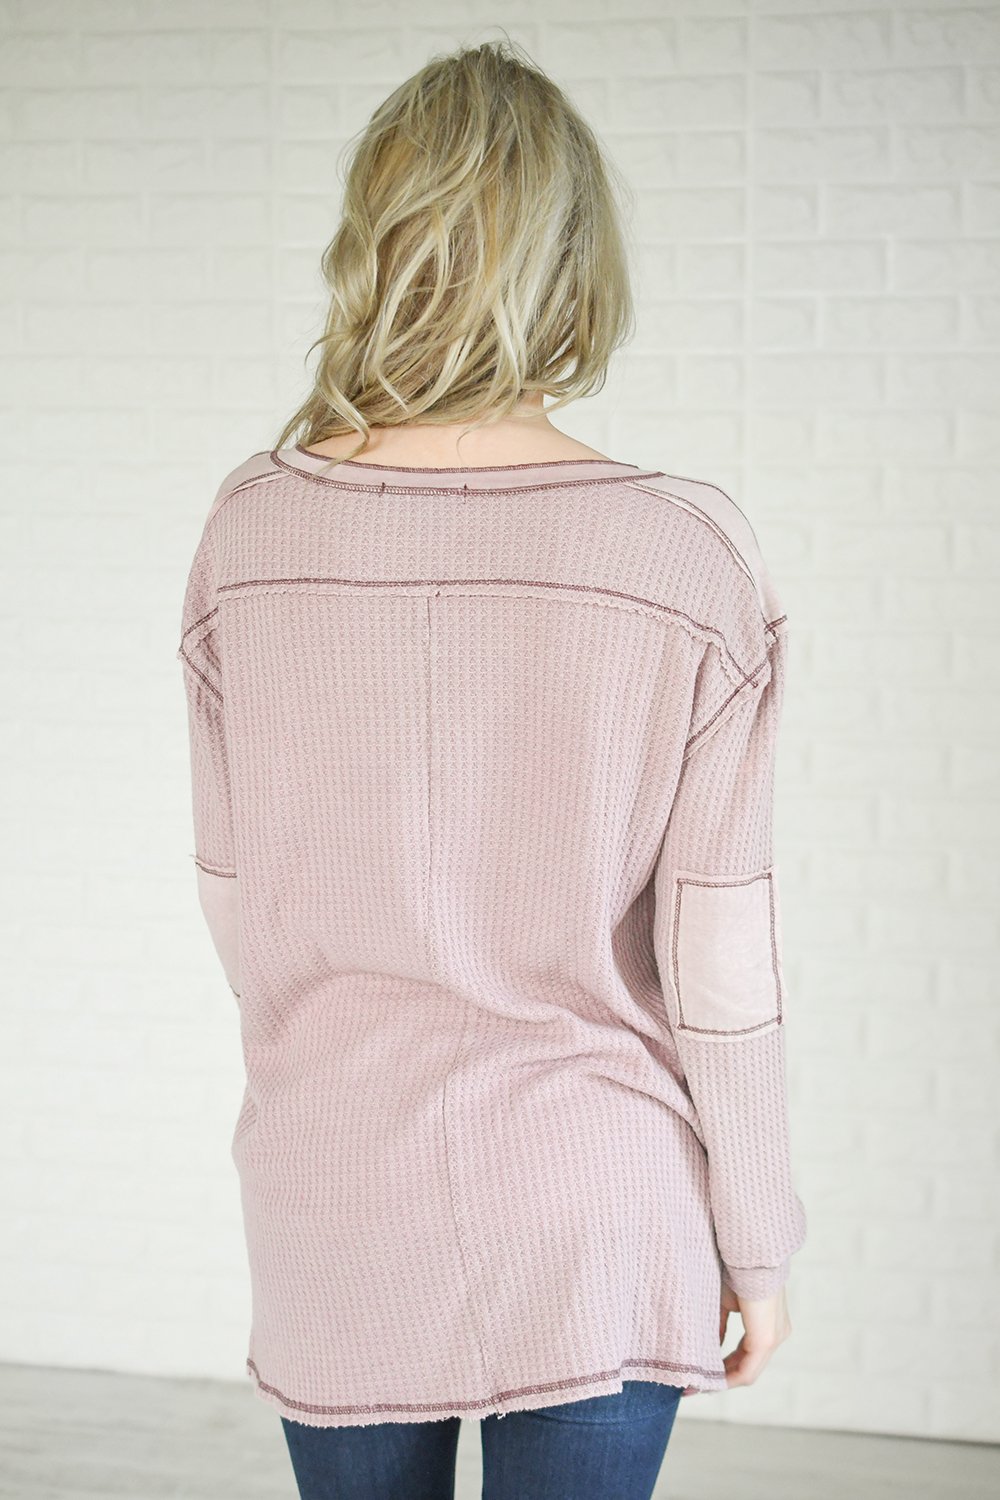 Mauve Elbow Patch Thermal Top